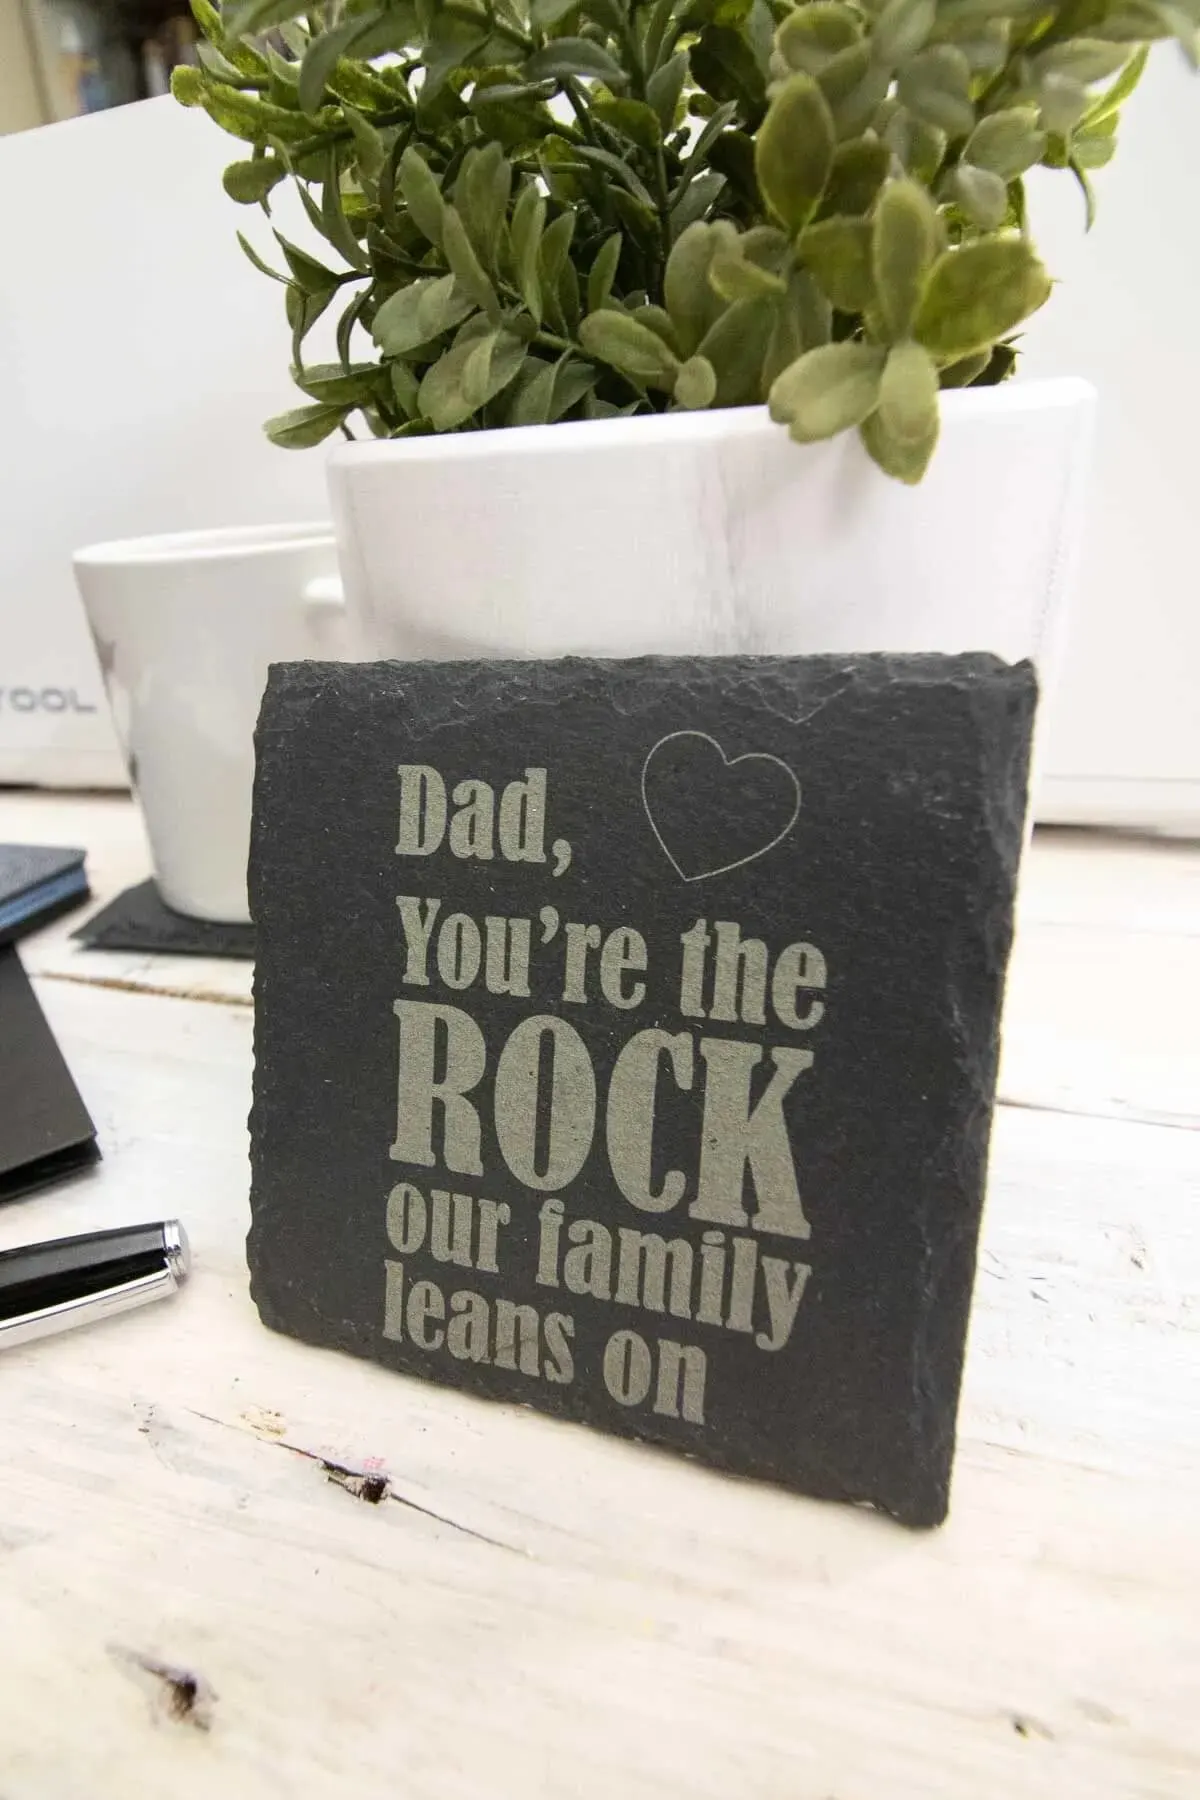 Slate coasters engraved with dad you're the rock our family leans on resting against a pot plant